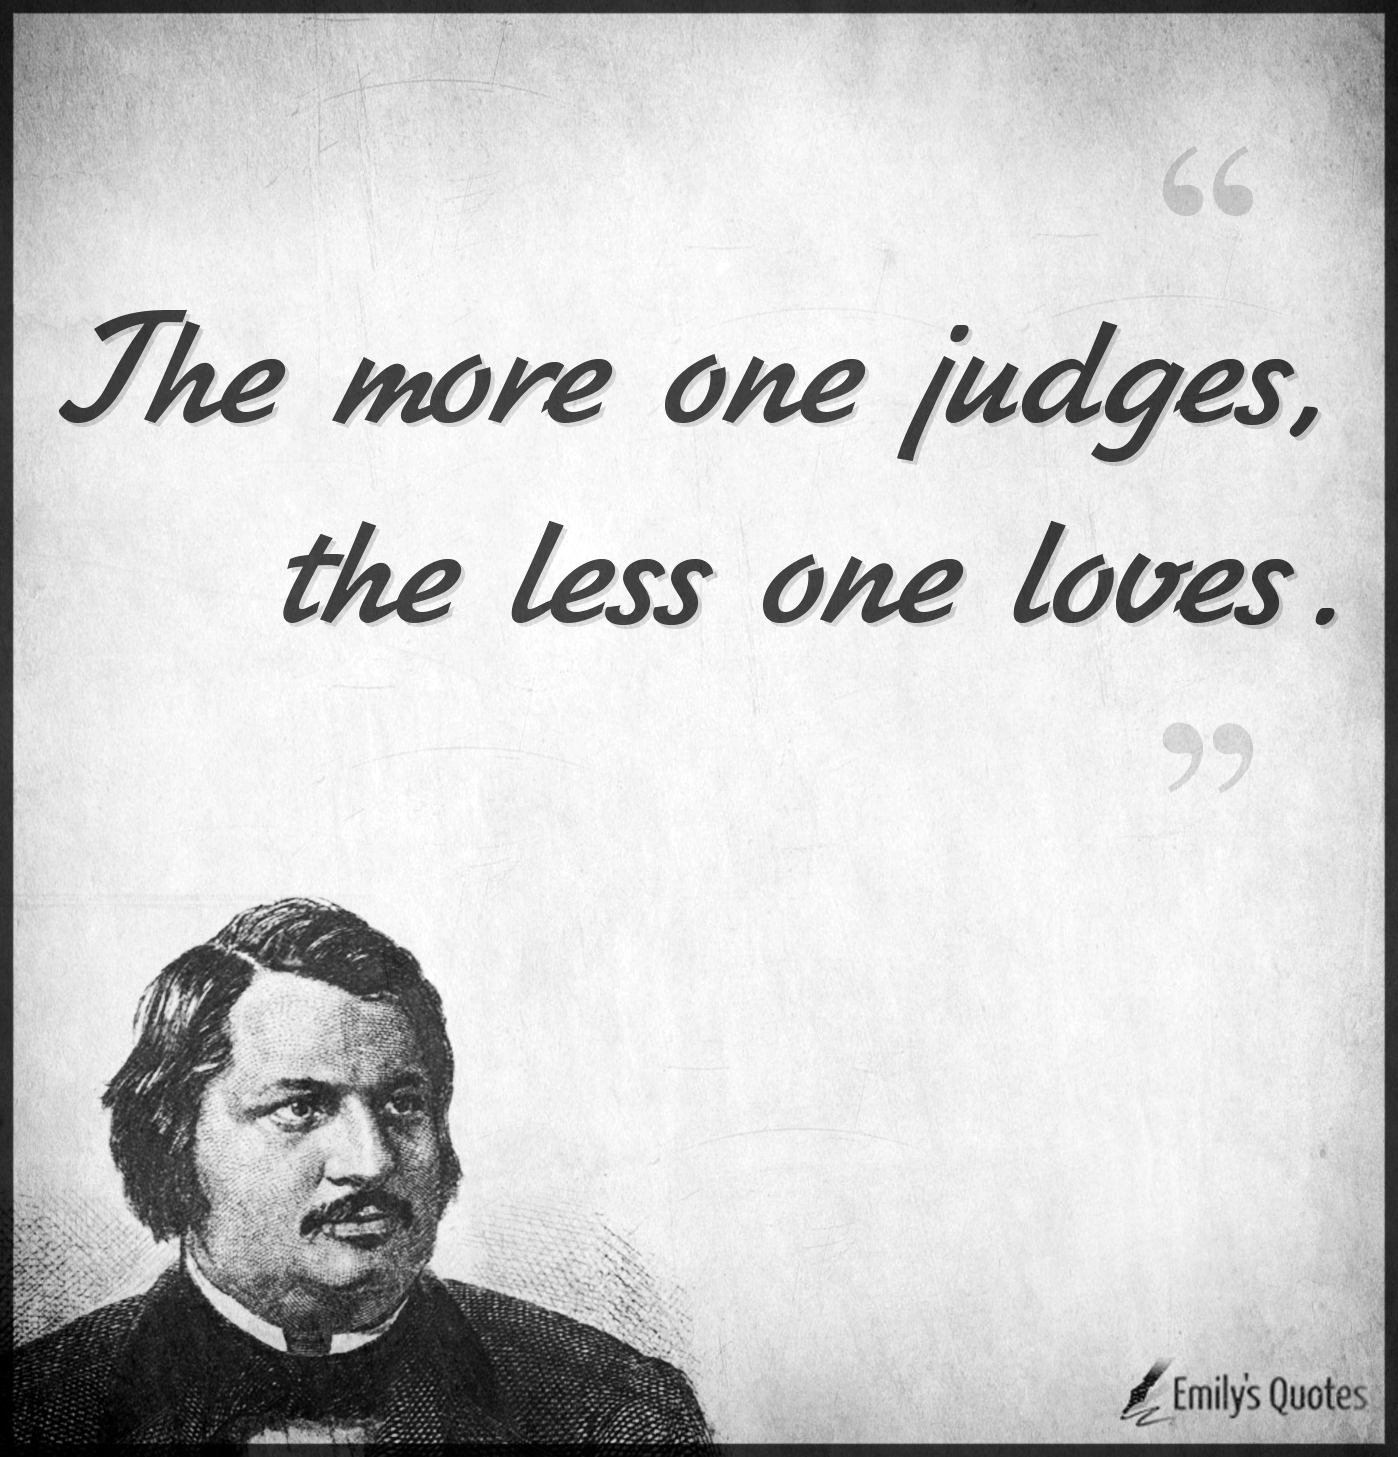 The more one judges, the less one loves